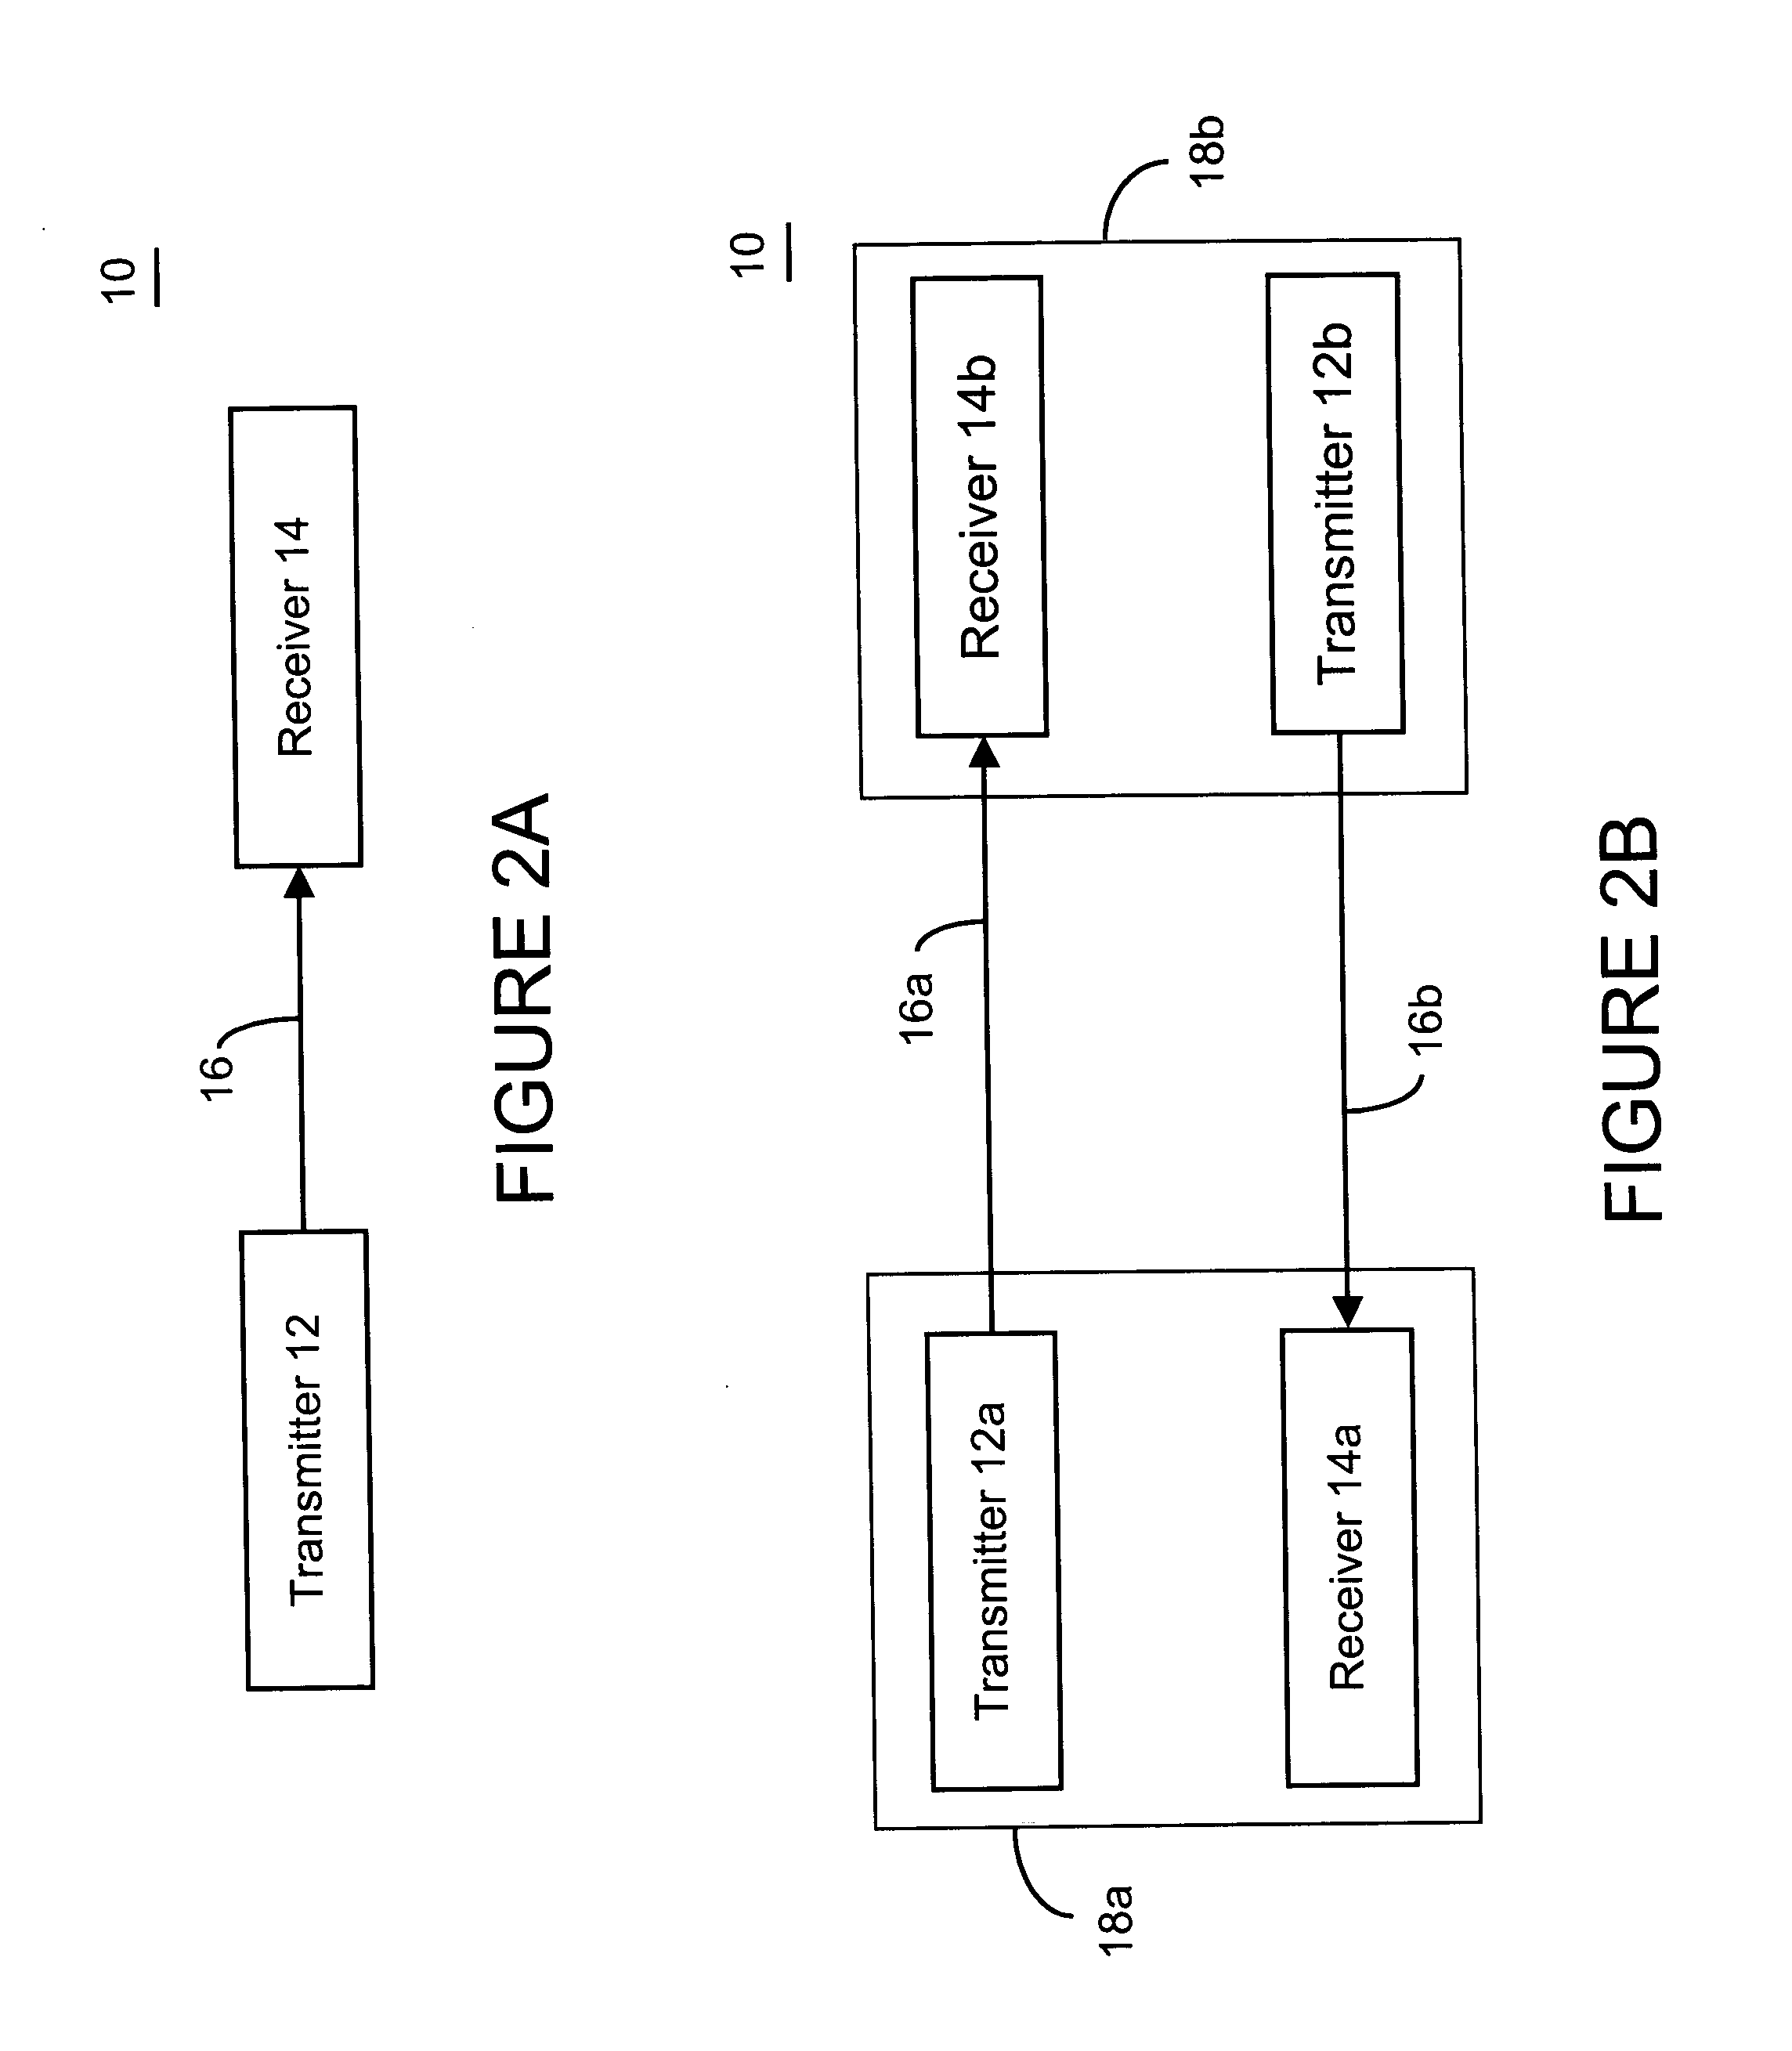 Receiver based decision feedback equalization circuitry and techniques